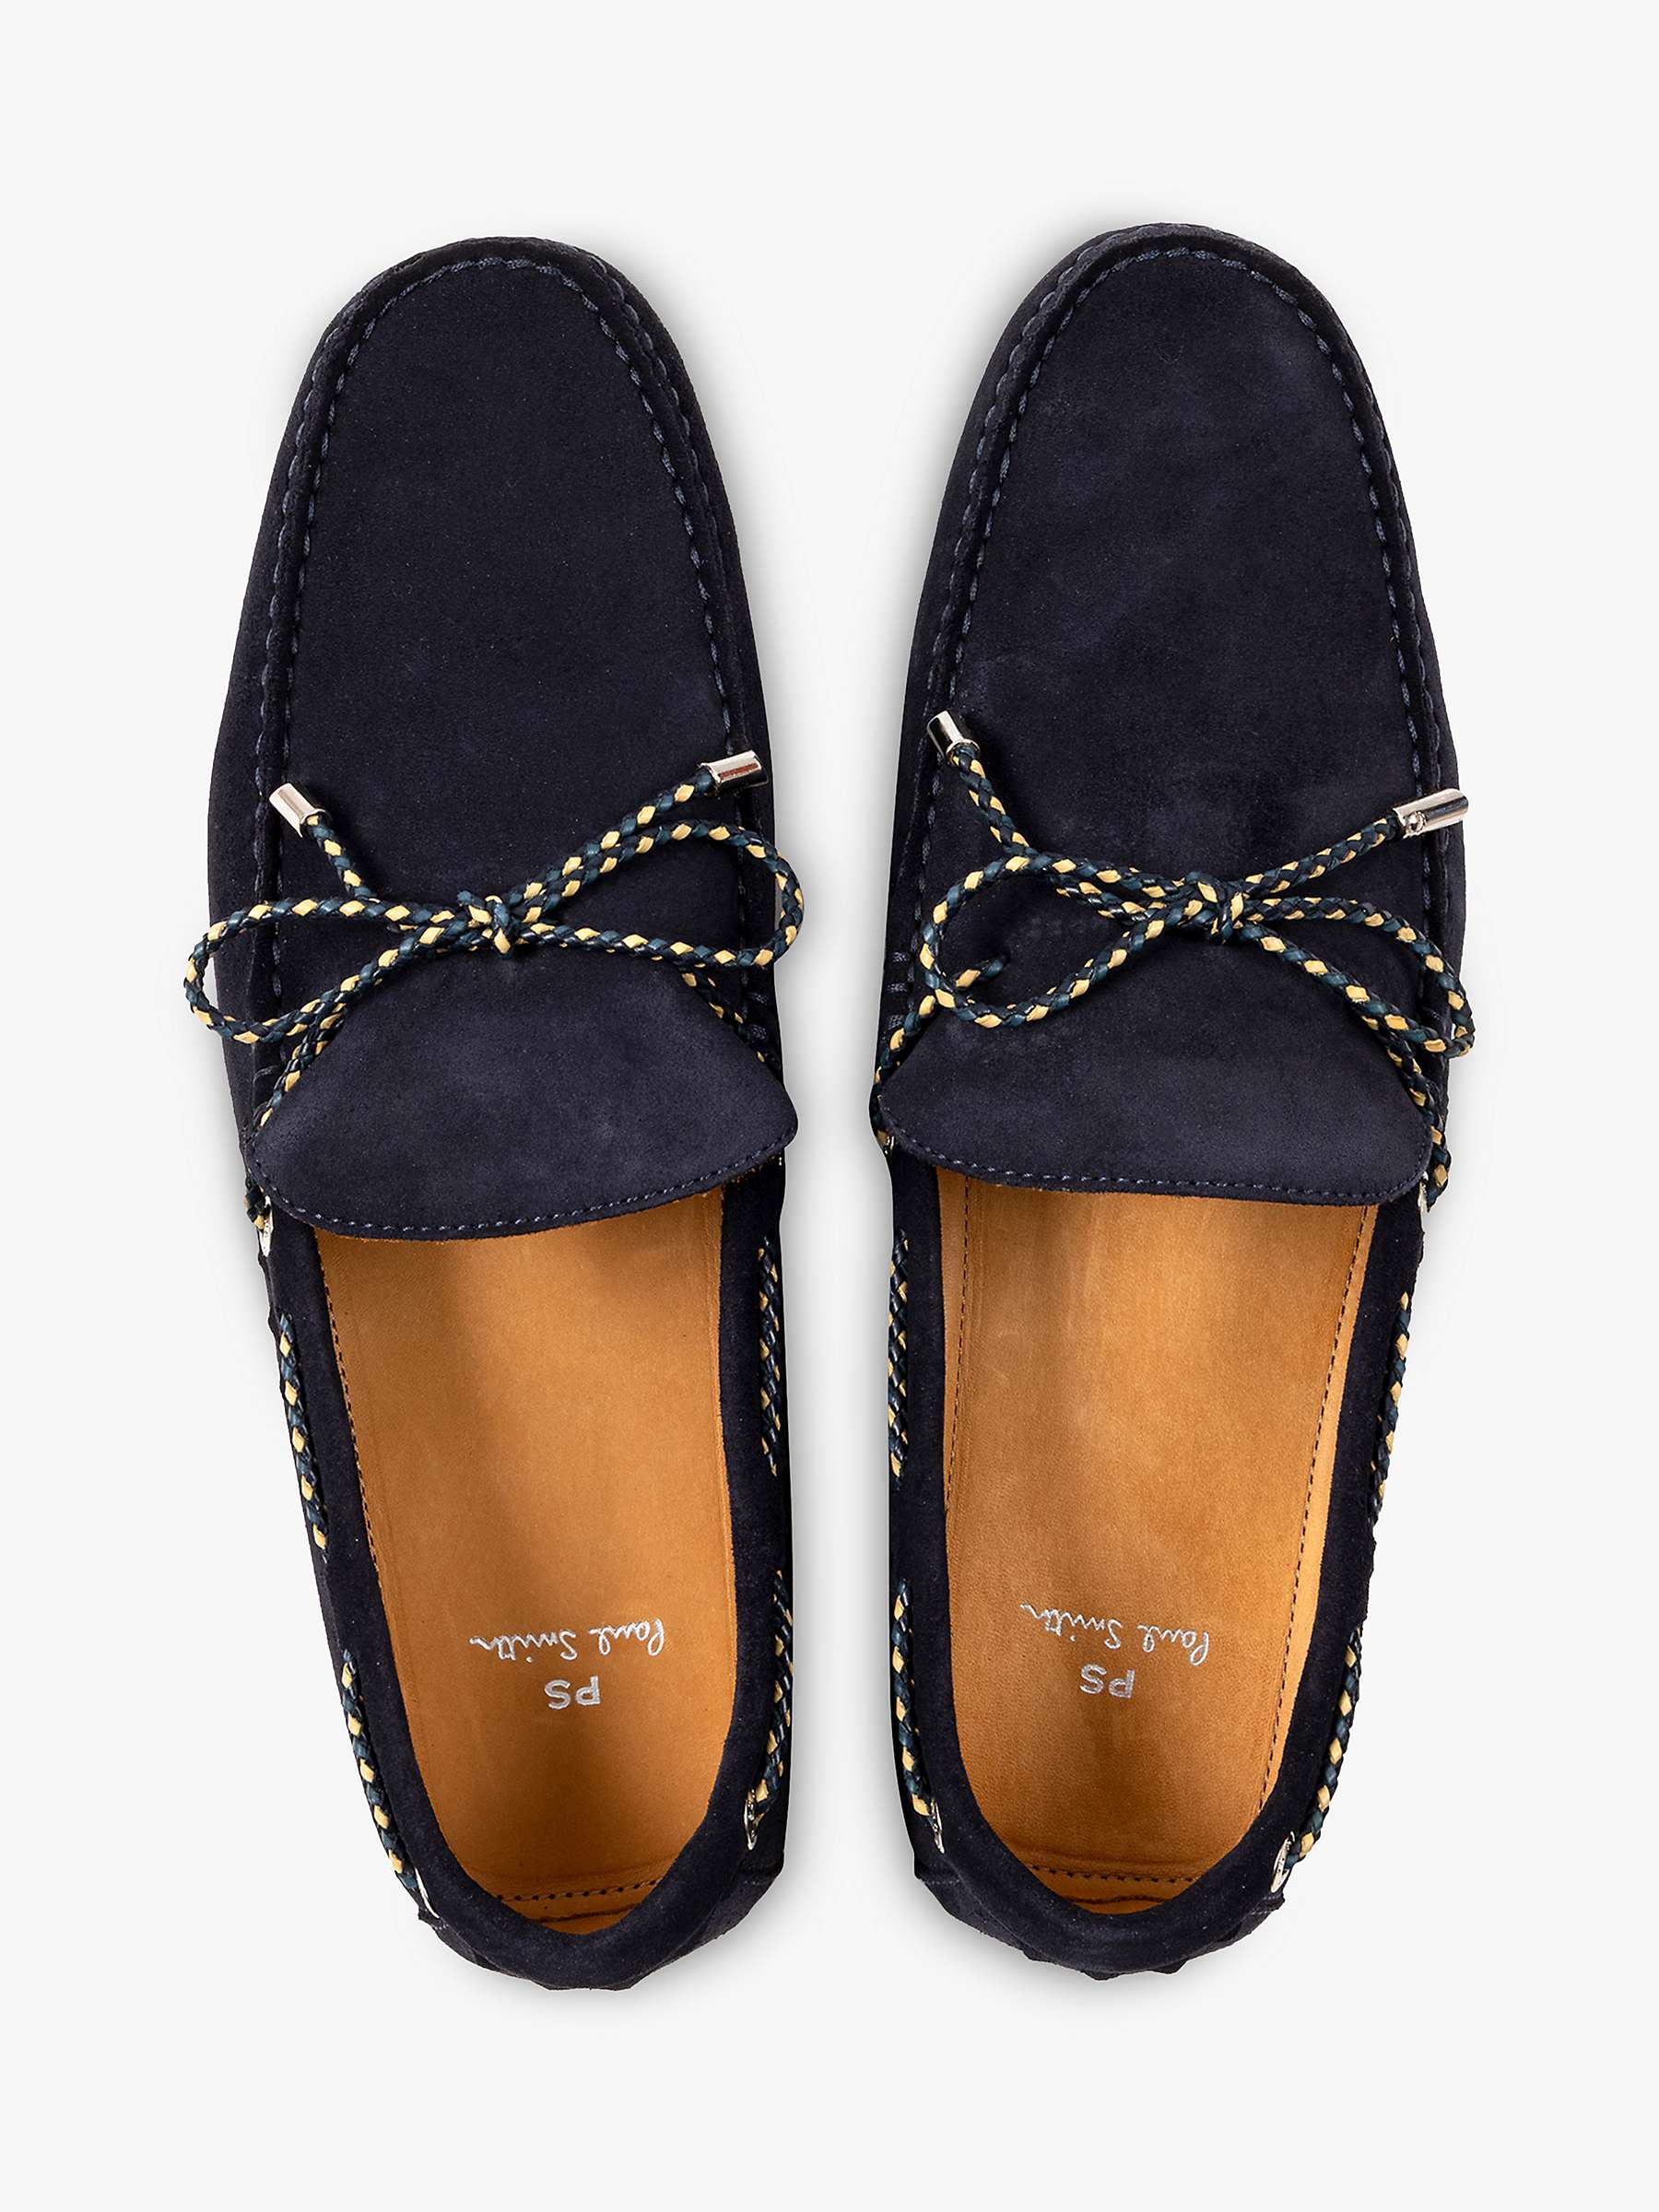 Buy Paul Smith Springfield Suede Loafers Online at johnlewis.com